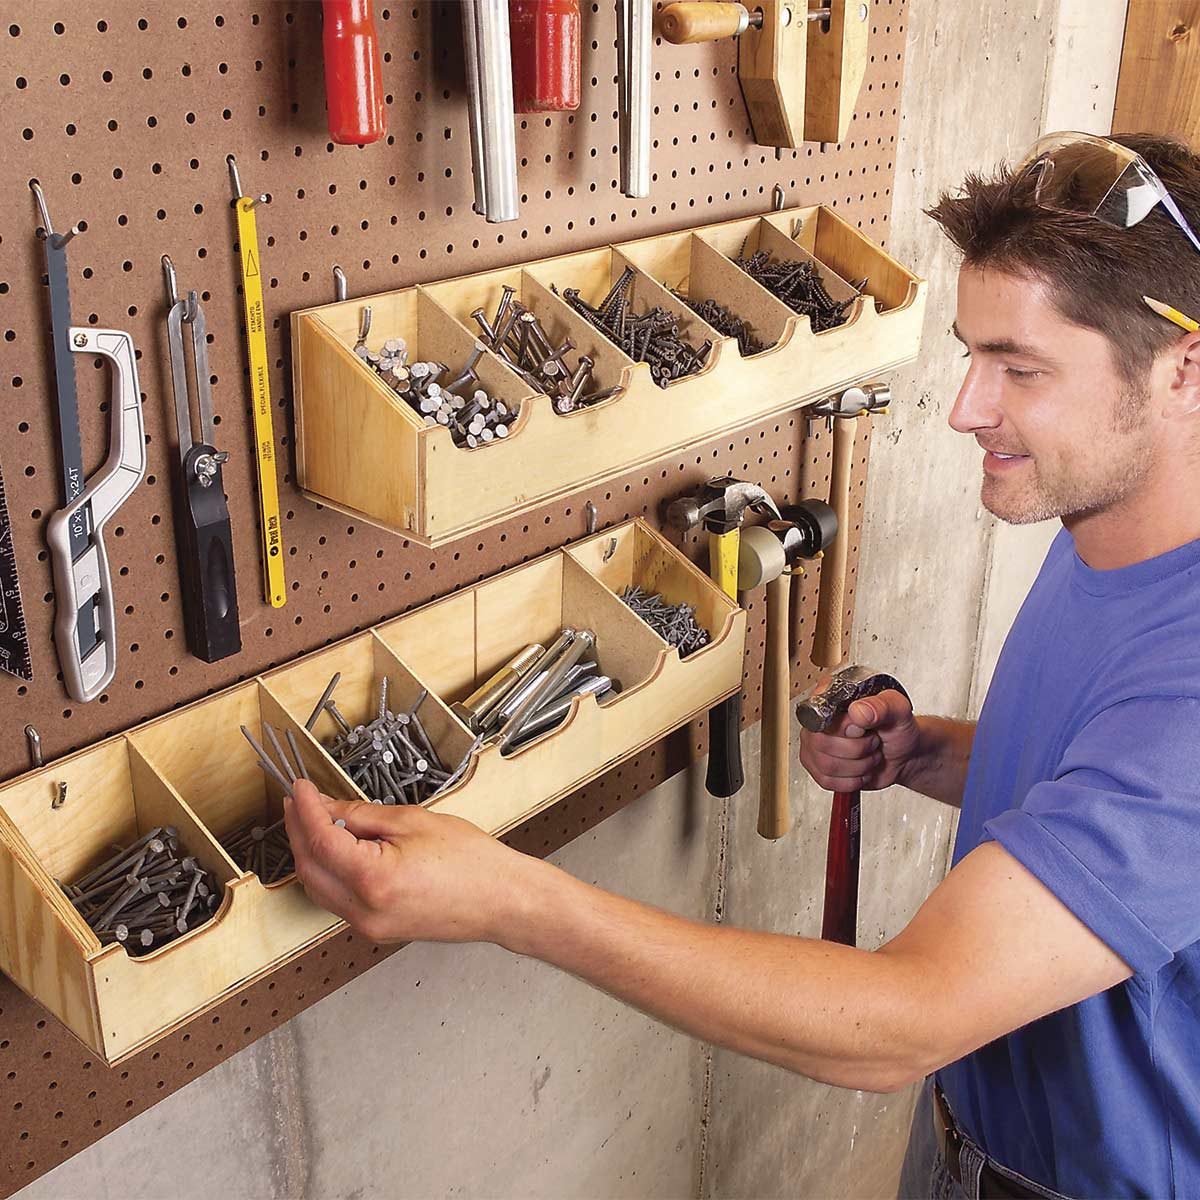 Small Work Storage Solutions, Tool Shelving Ideas